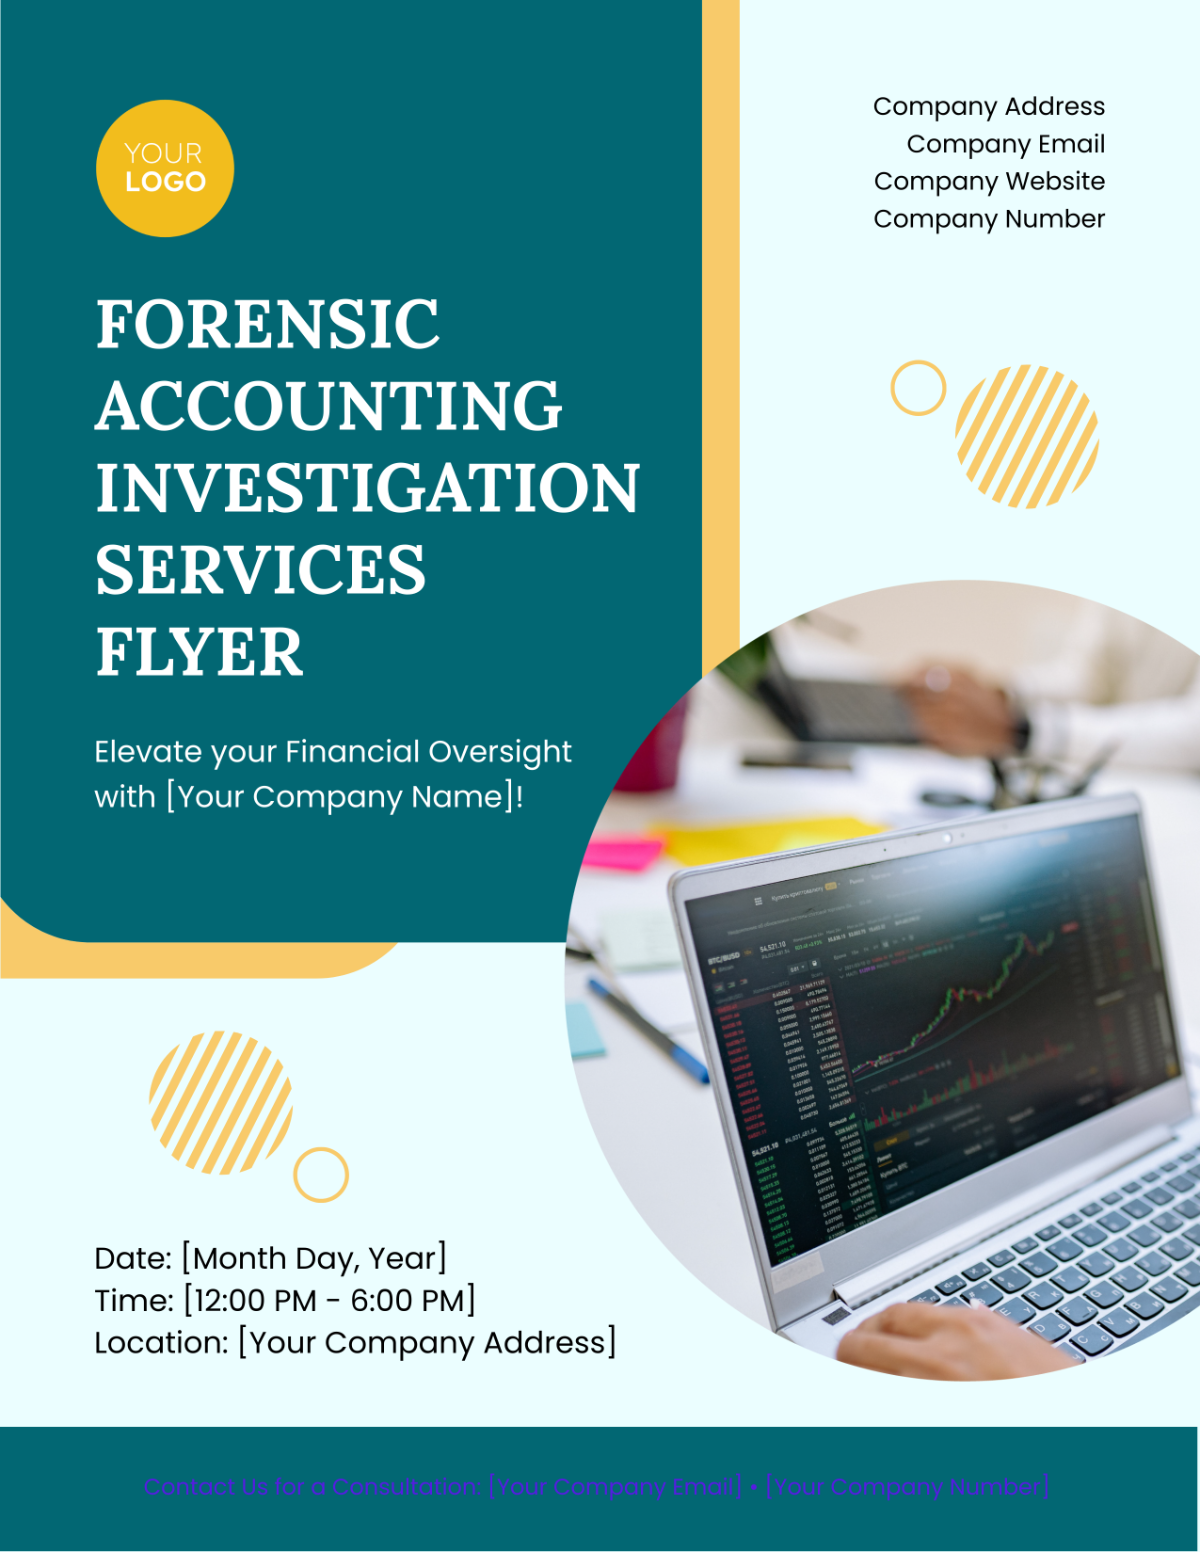 Free Forensic Accounting Investigation Services Flyer Template